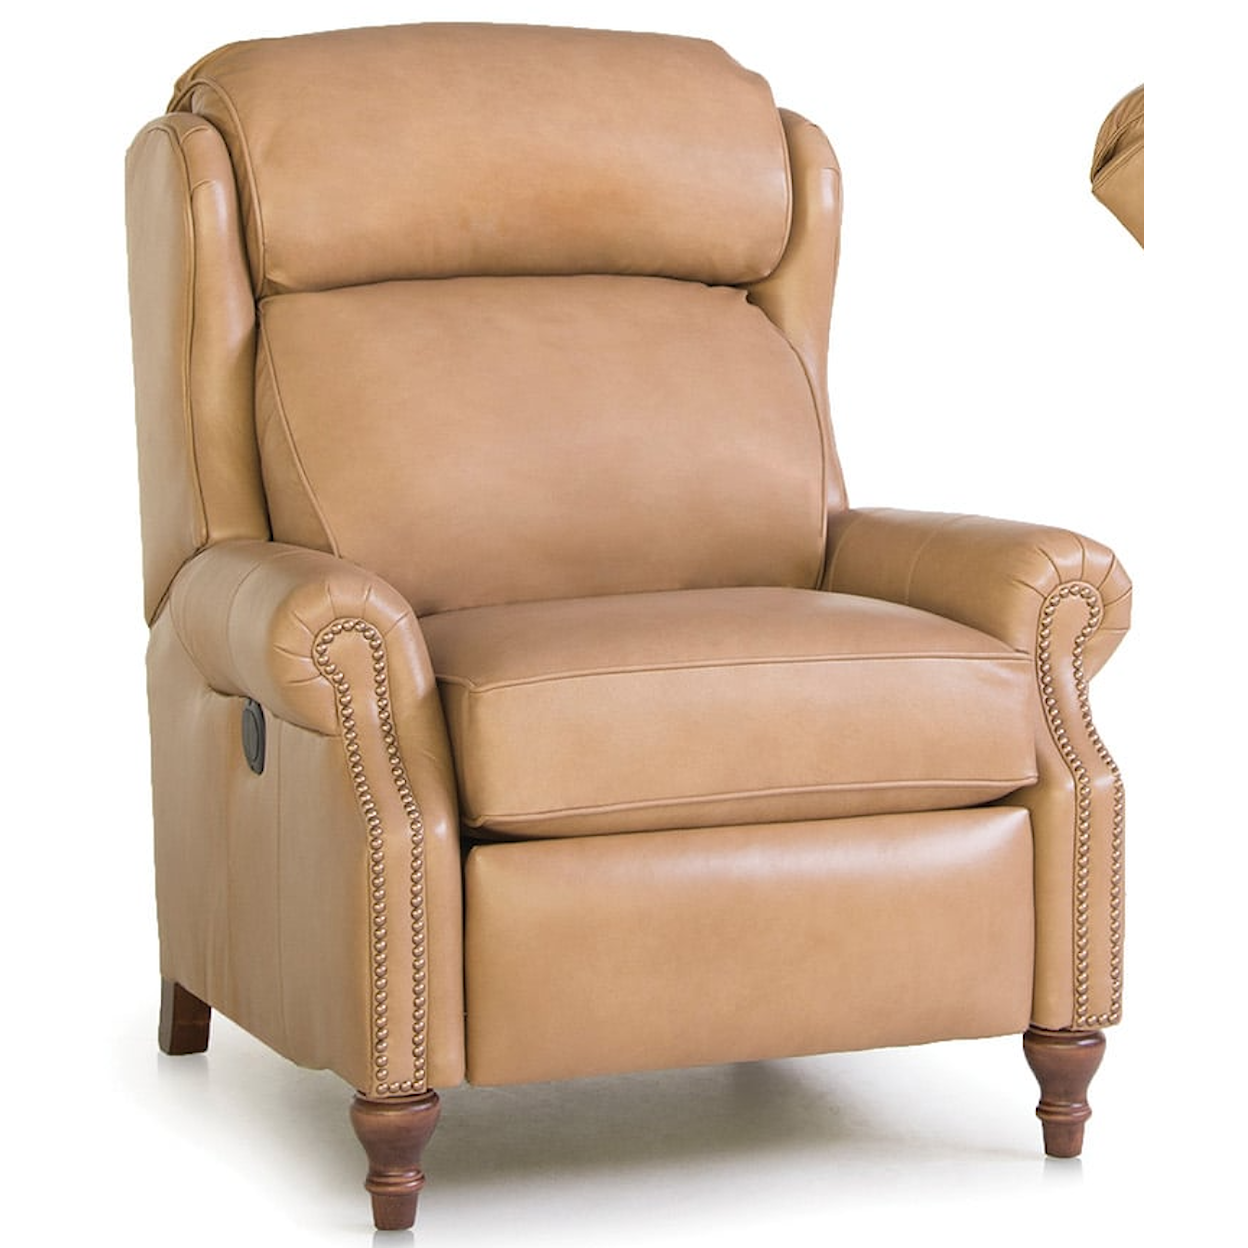 Smith Brothers Recliners  Pressback Recliner